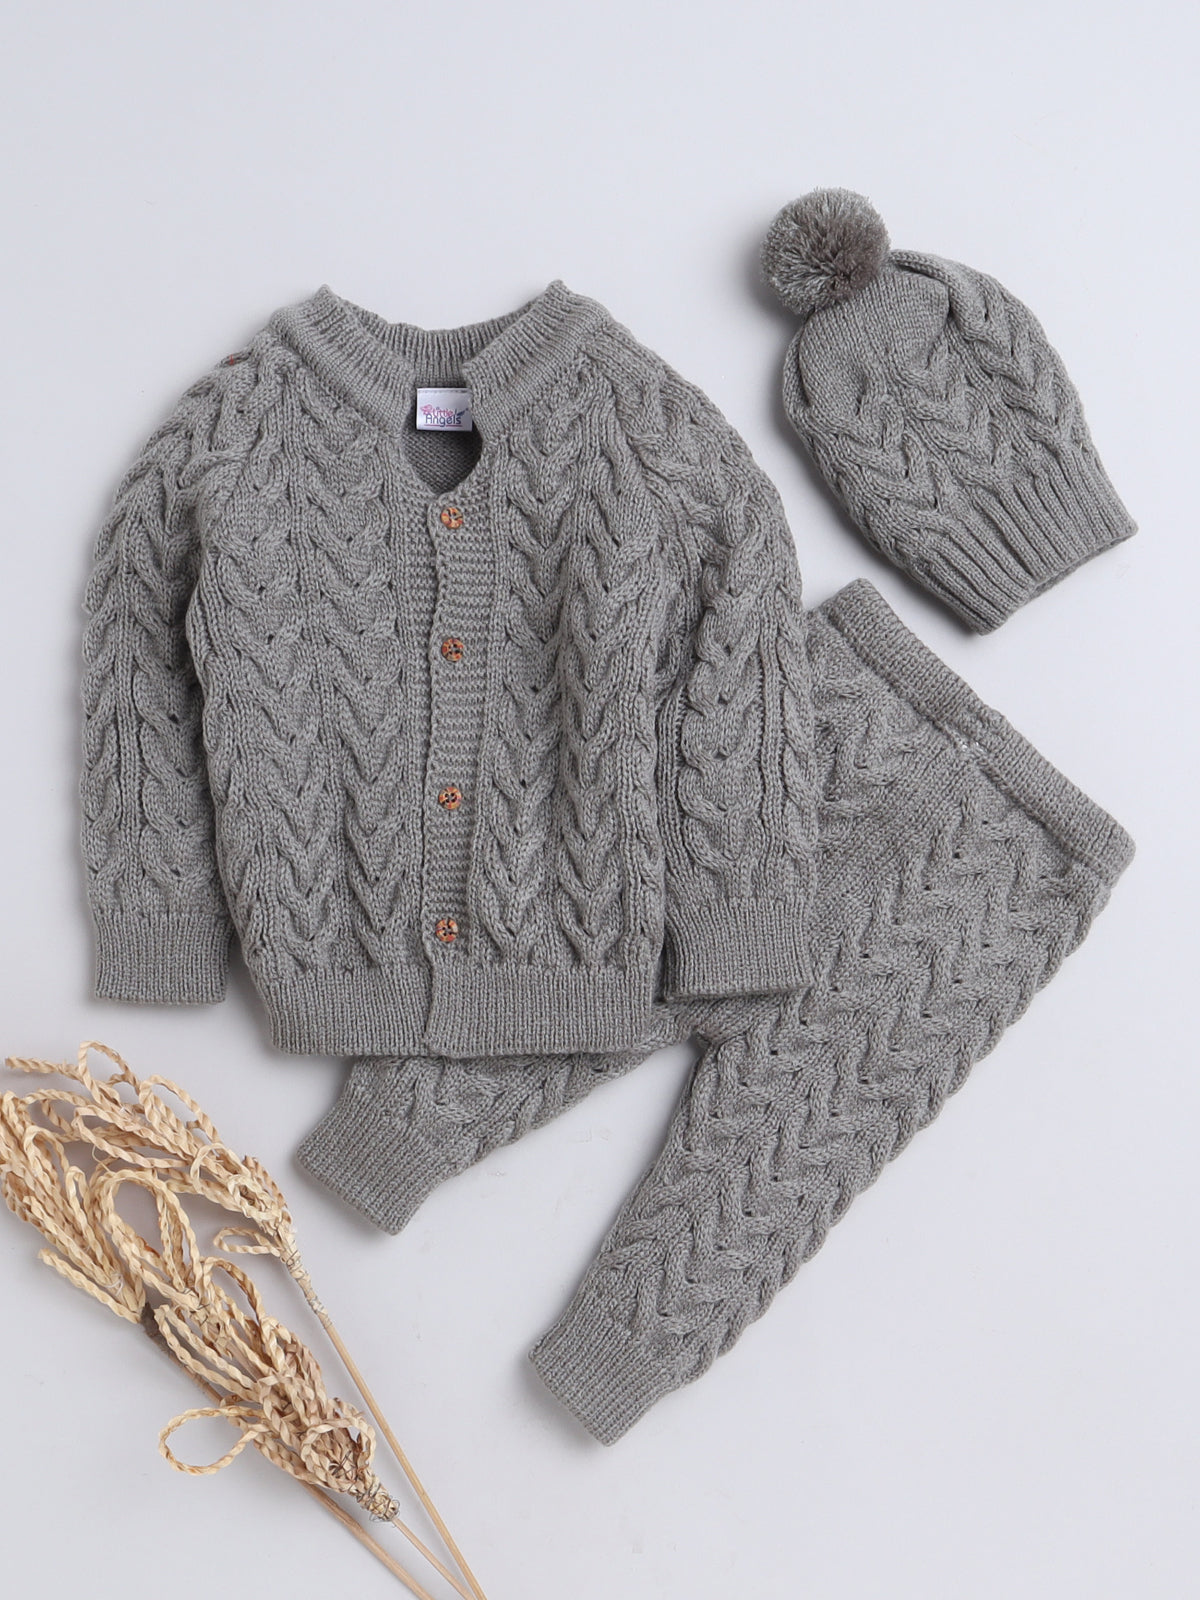 Little Angels Winter Chic Cable Knit Baby Outfit - Gray Sweater with Pant, Round Pom Pom Cap, Heavy Winter Wear for baby, available in 0 to 1 Year range.